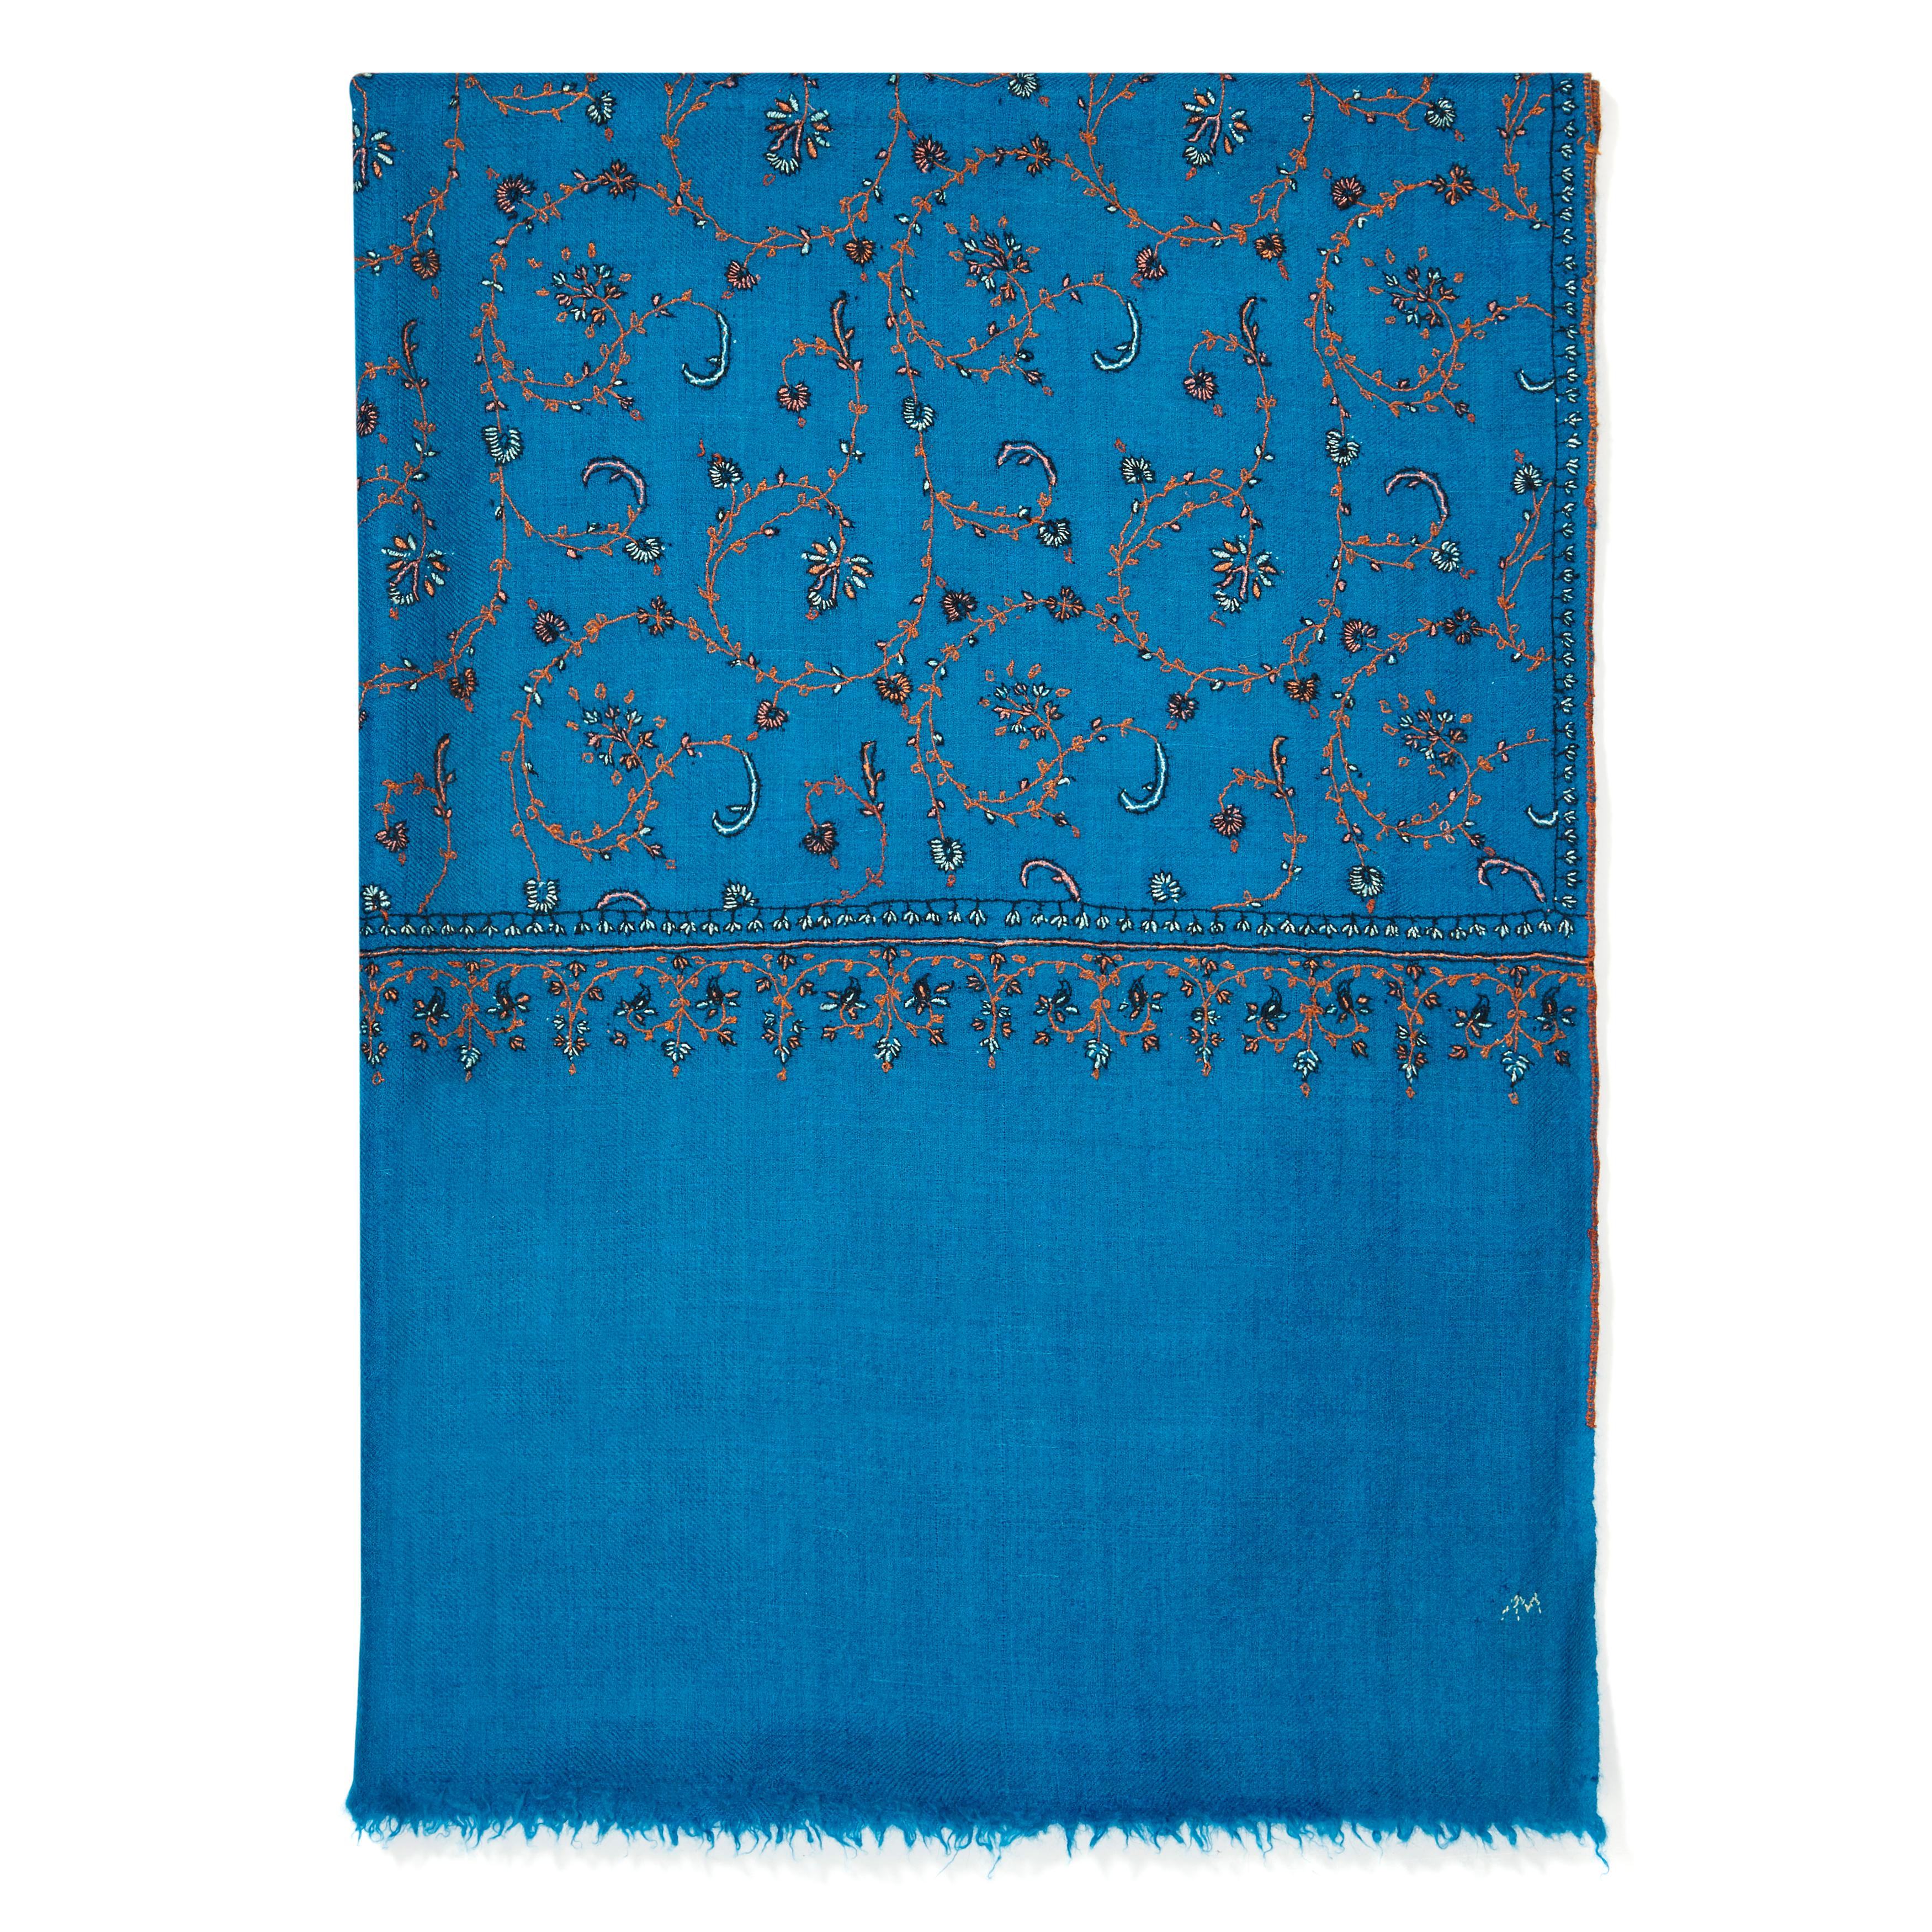 Limited Edition Hand Embroidered Cashmere Shawl in Blue Made in Kashmir - Gift (Blau)